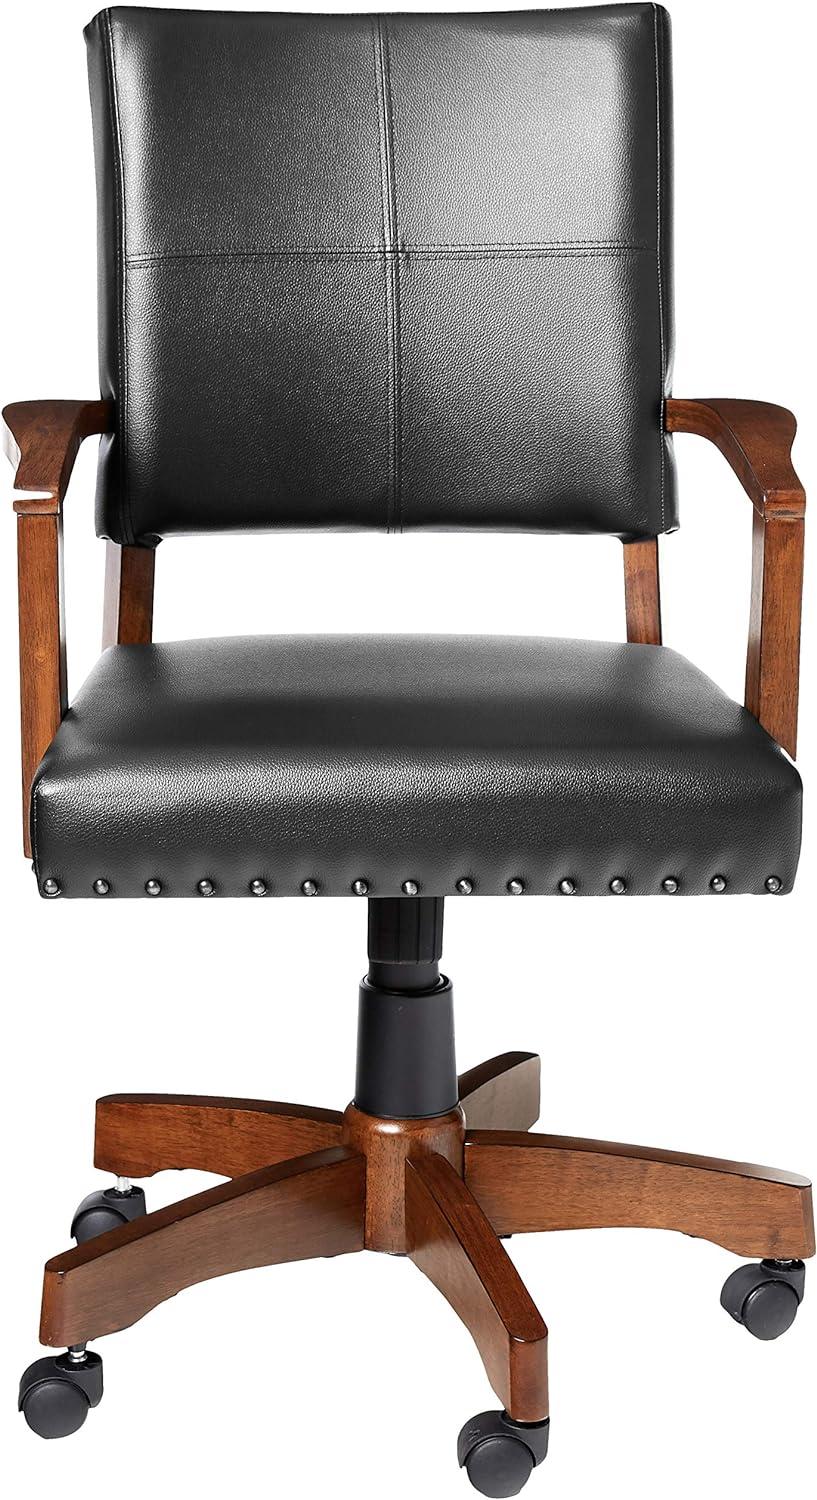 Deluxe Black Leather Swivel Banker Chair with Wood Accents